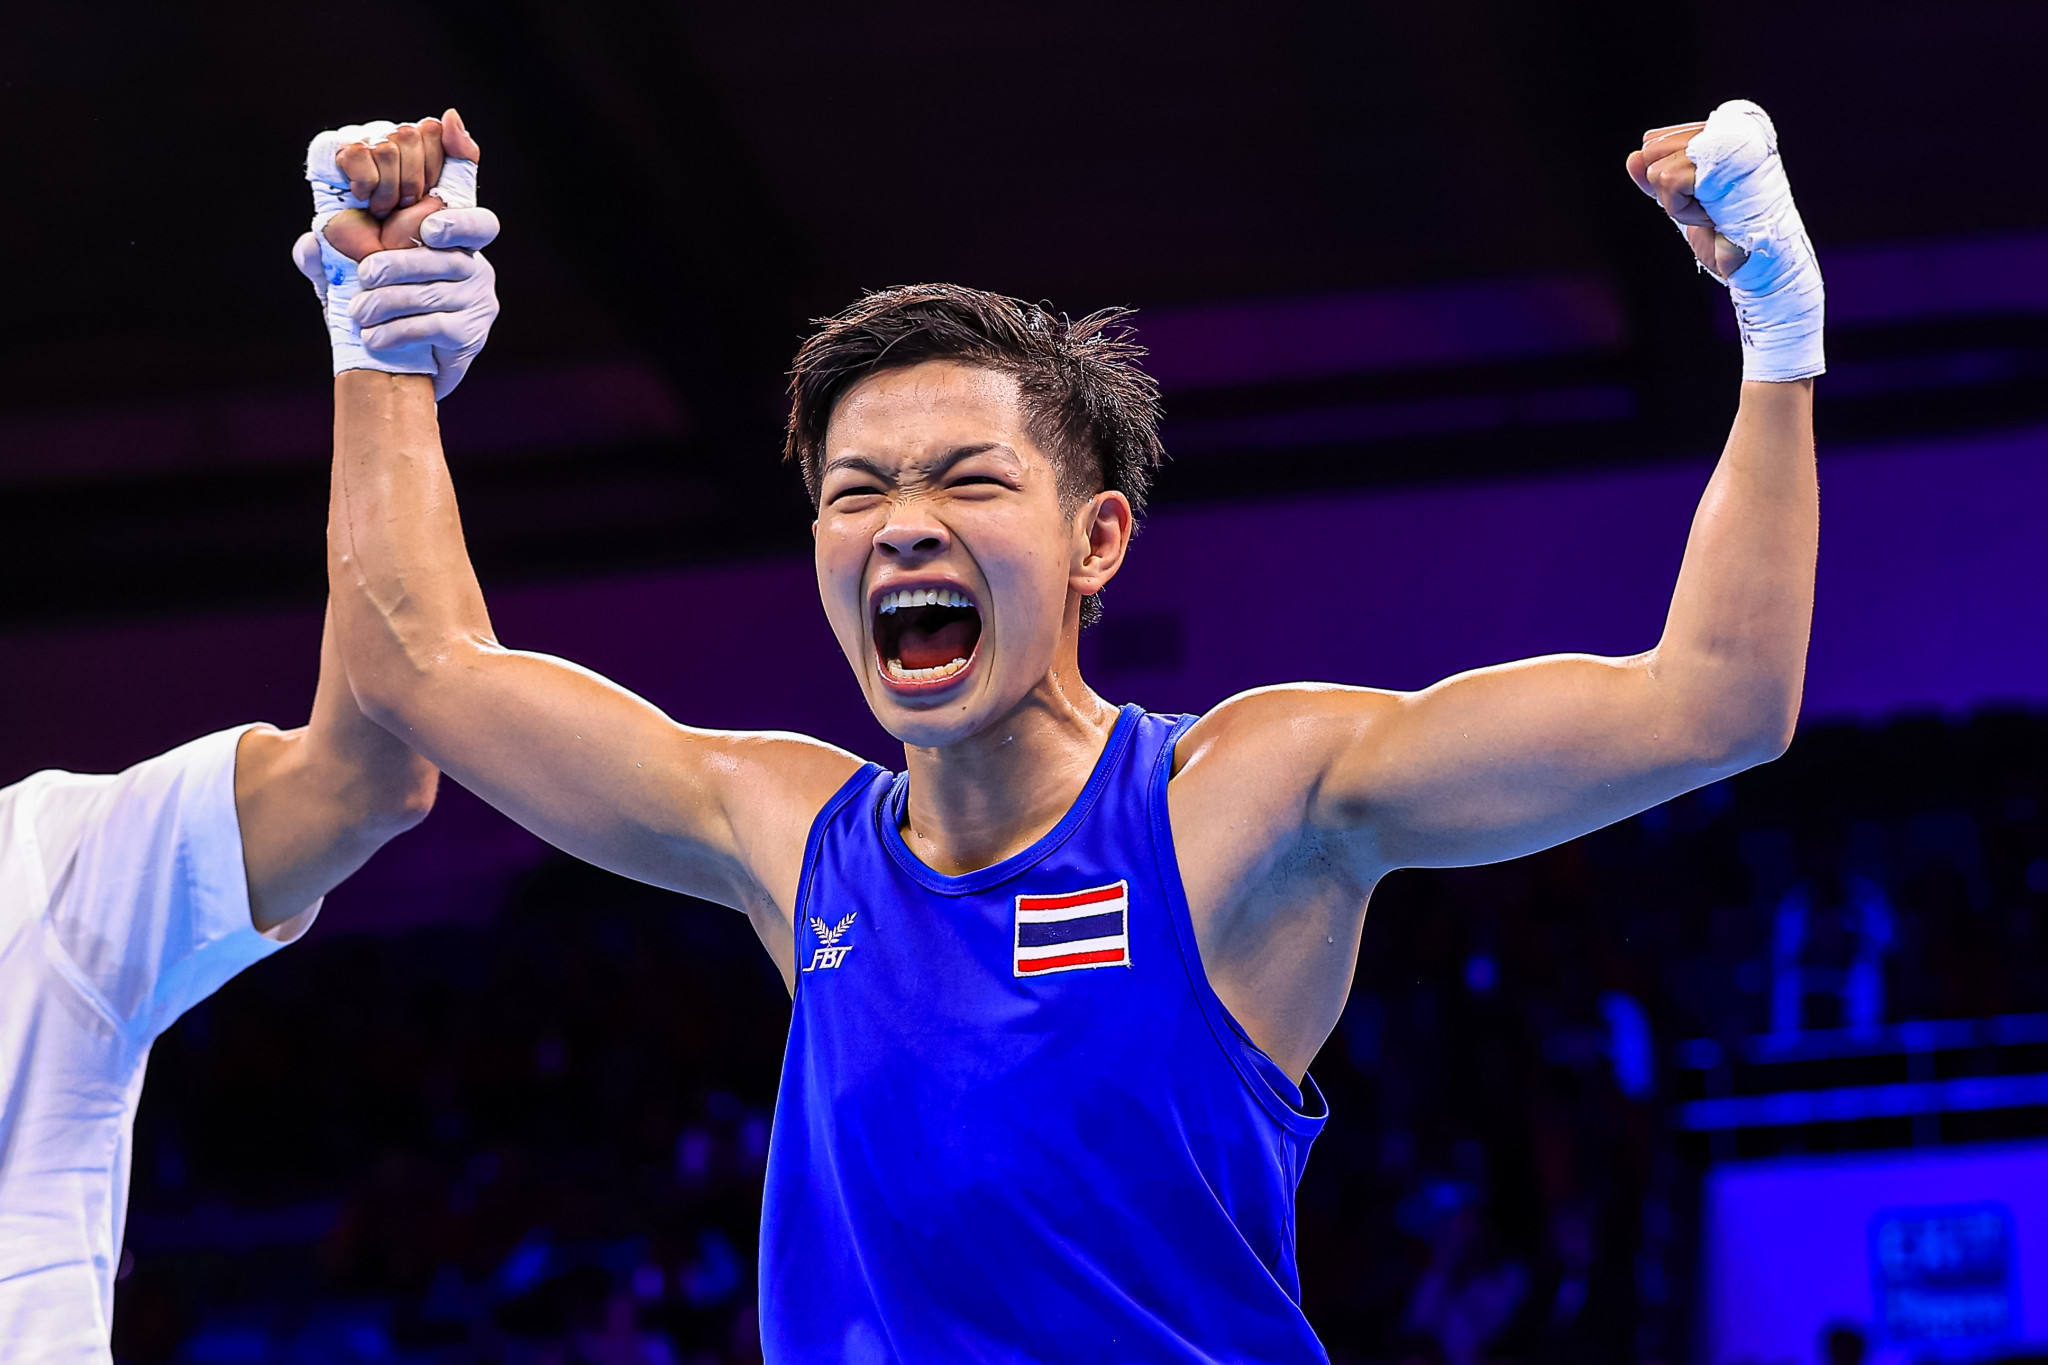 Thailand’s Jutamas Jitpong celebrates after beating home favourite Preeti in the light middleweight division ©IBA